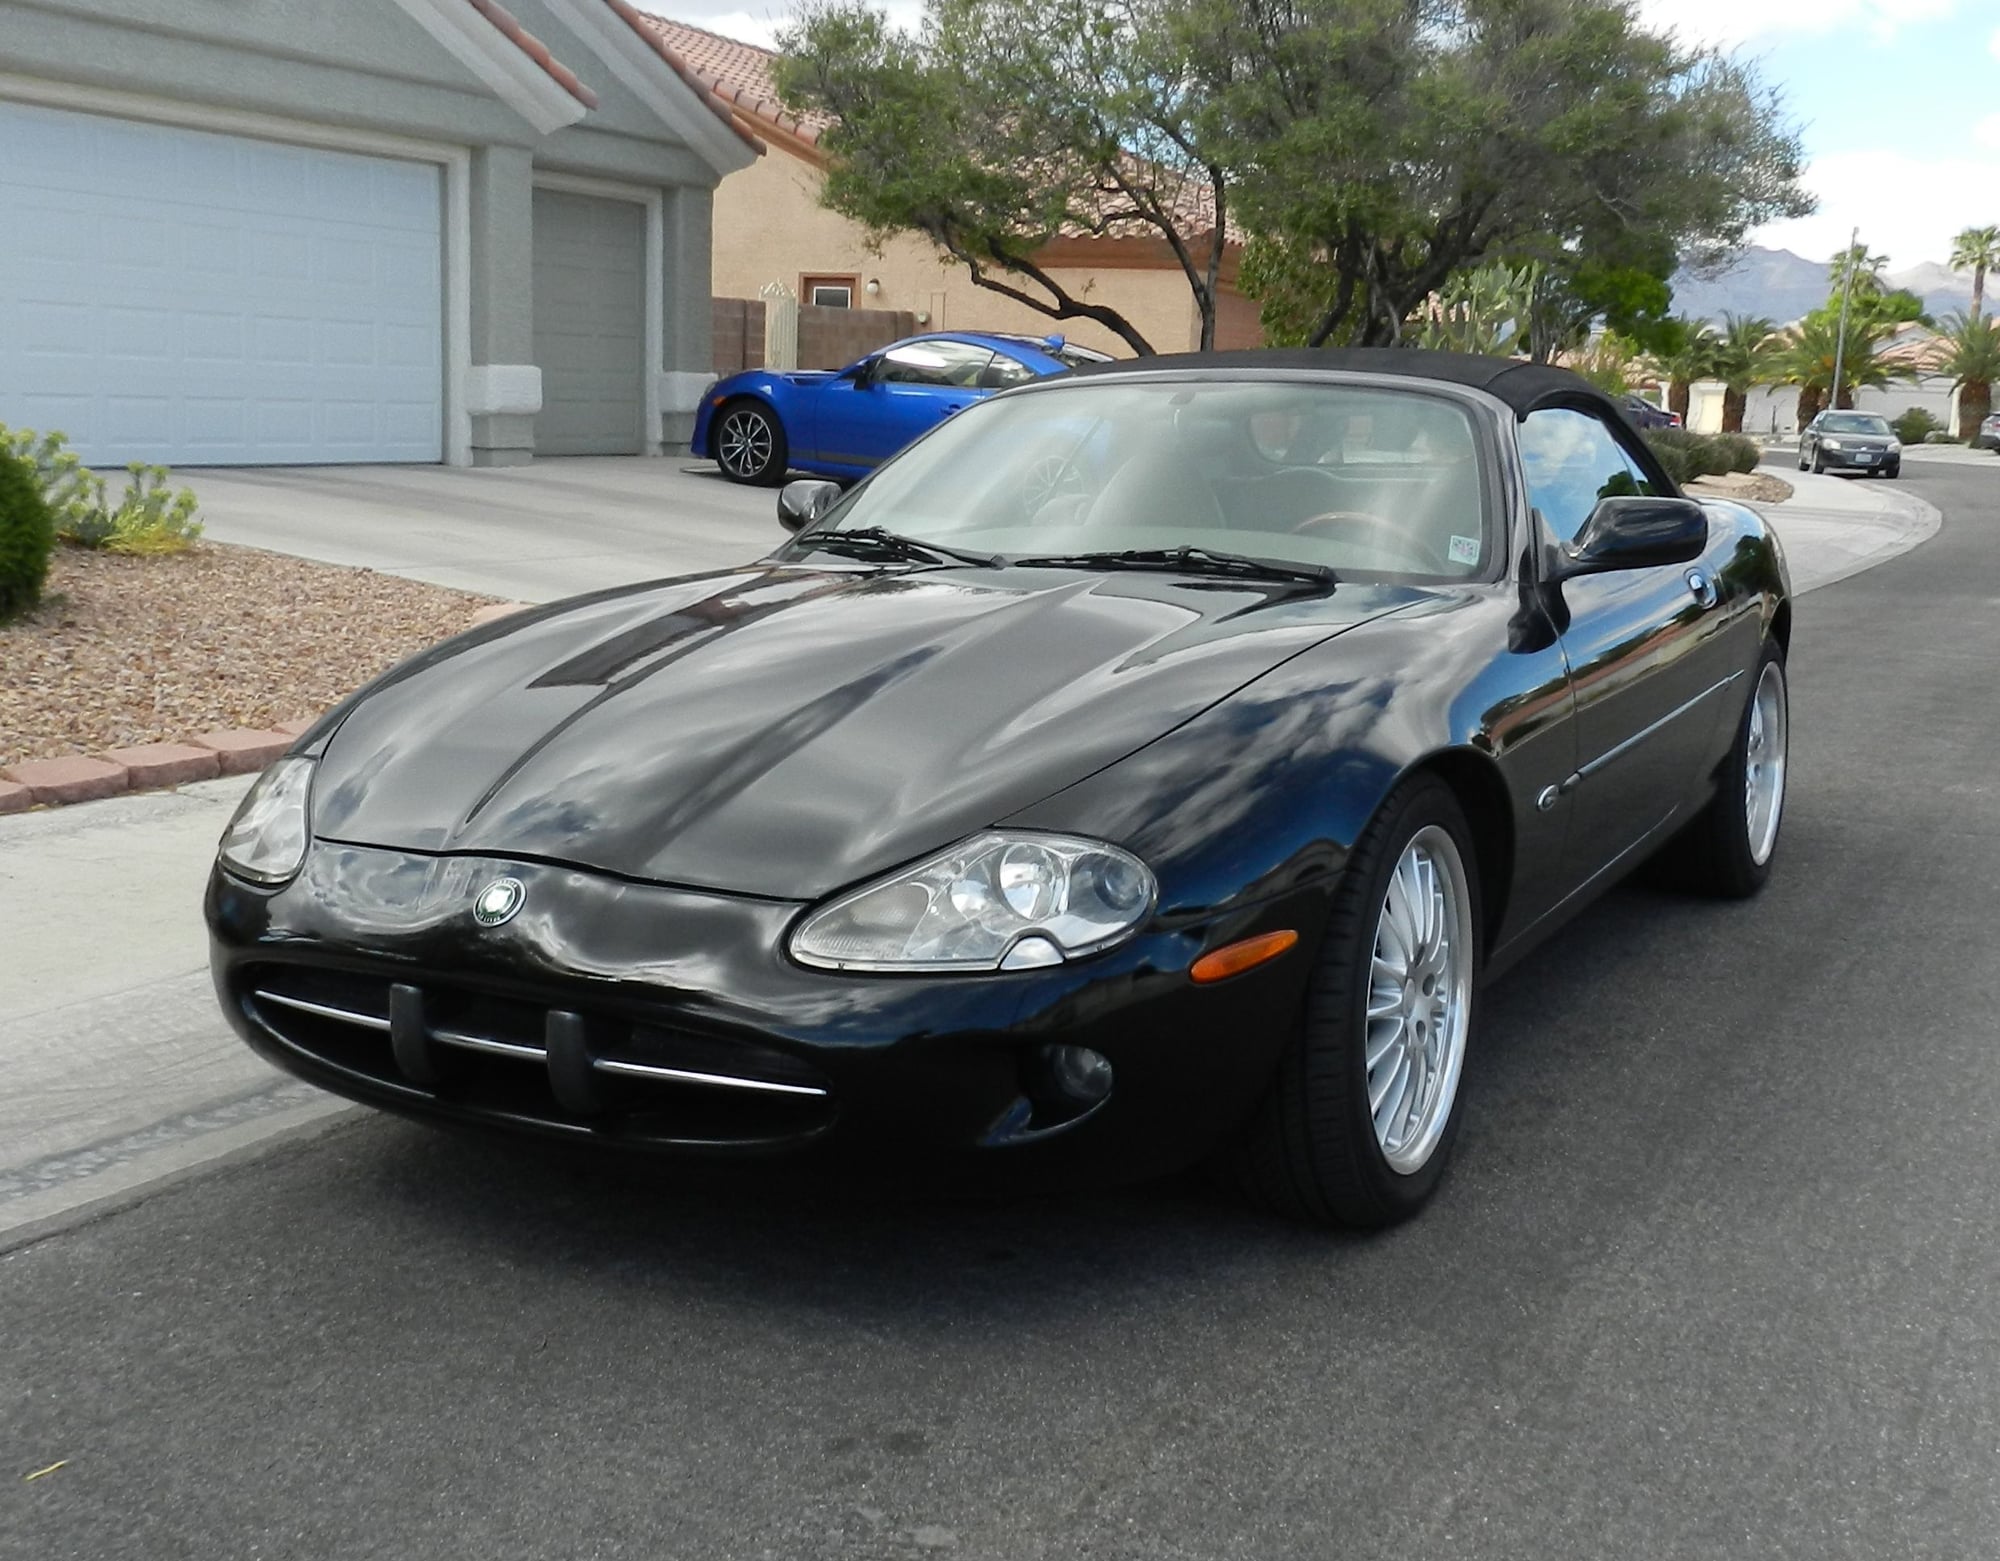 1998 Jaguar XK8 - XK8 Upgrades Are Done - Used - VIN SAJGX2244WC018659 - 95,500 Miles - 8 cyl - 2WD - Automatic - Convertible - Black - Las Vegas, NV 89130, United States